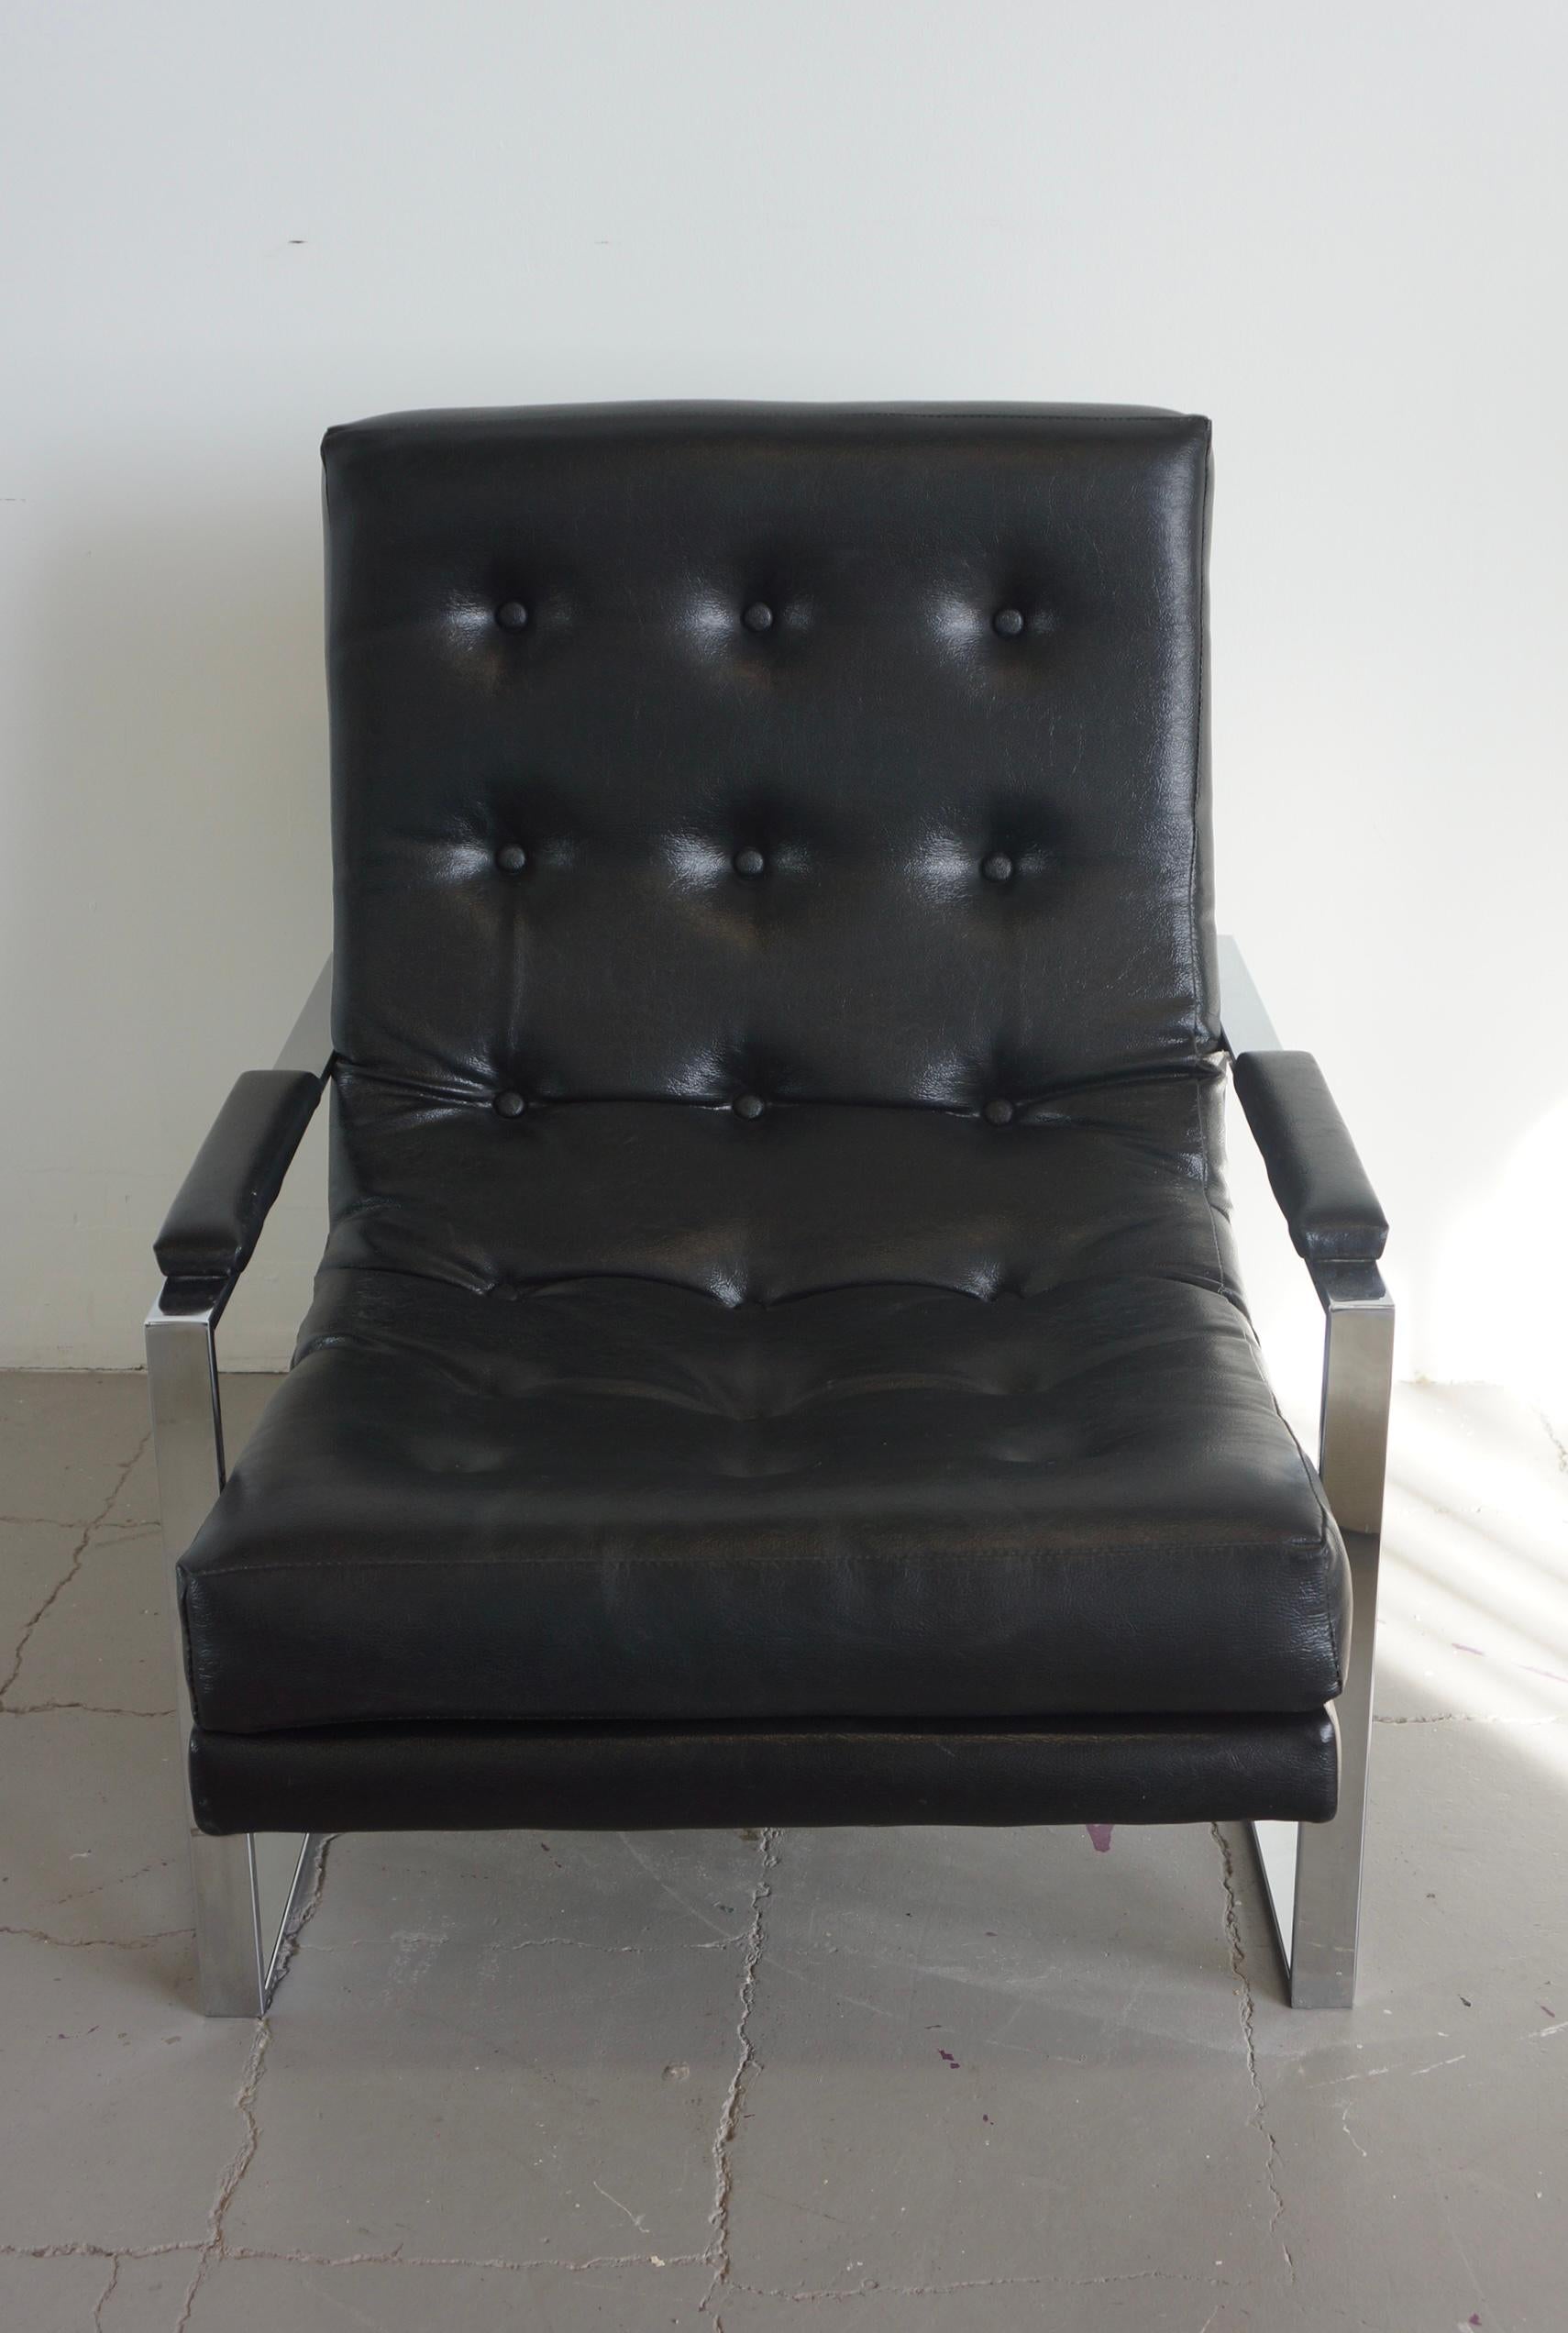 Other Mid-century Modern Tufted Leather and Chrome Lounge Chair For Sale